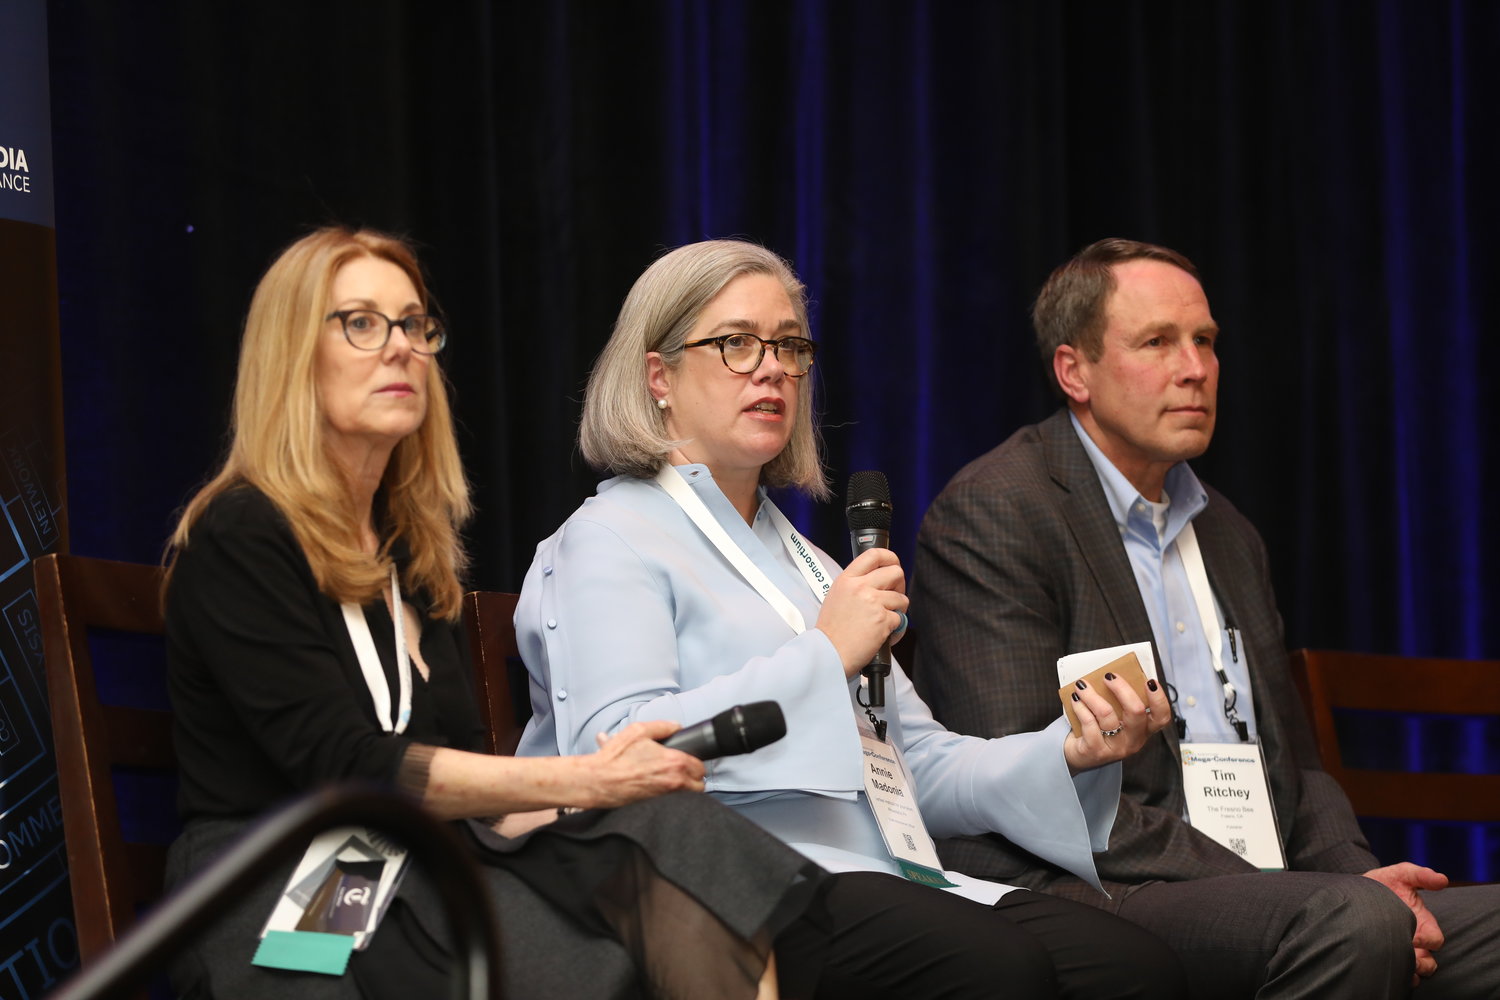 Fraser Nelson, Annie Madonia and Tim Ritchey on "Funding Outside the Box" at the 2020 Mega-Conference. (Photo by Bob Booth)